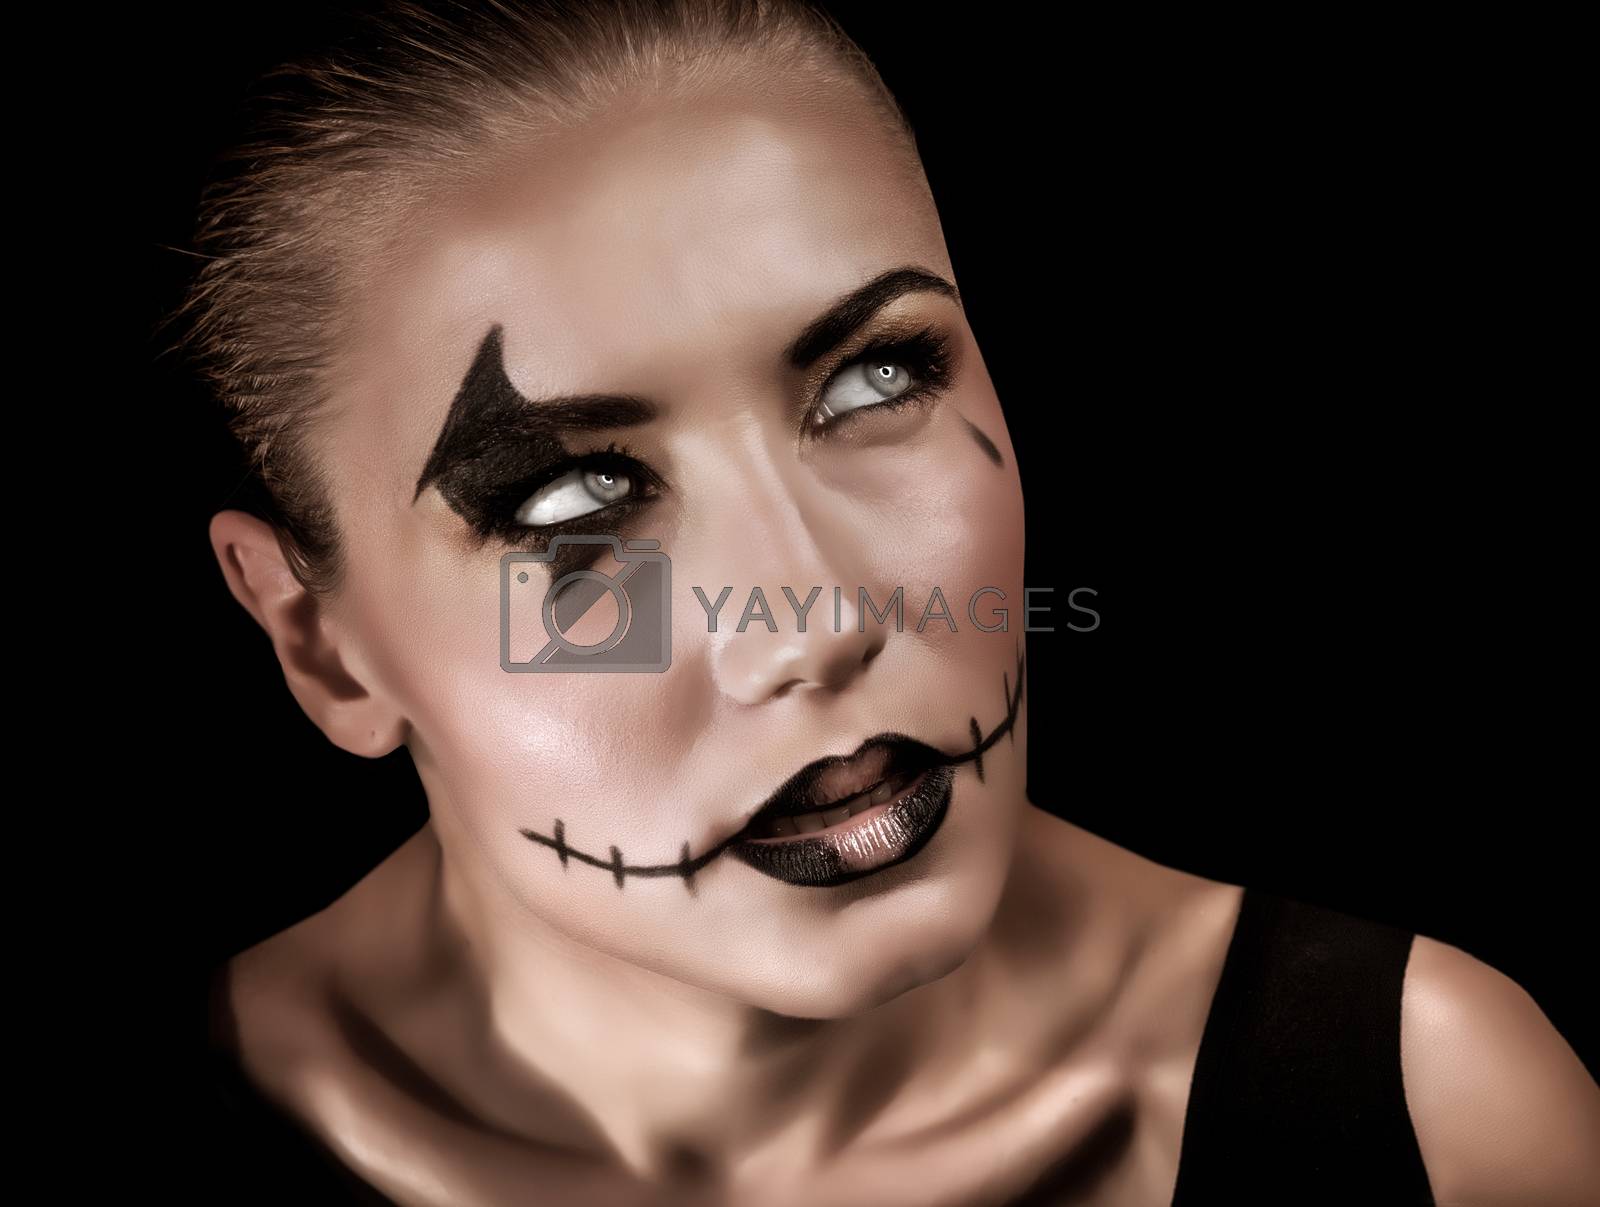 Portrait of aggressive young woman with creepy makeup and black tear isolated on black background, Halloween celebration concept